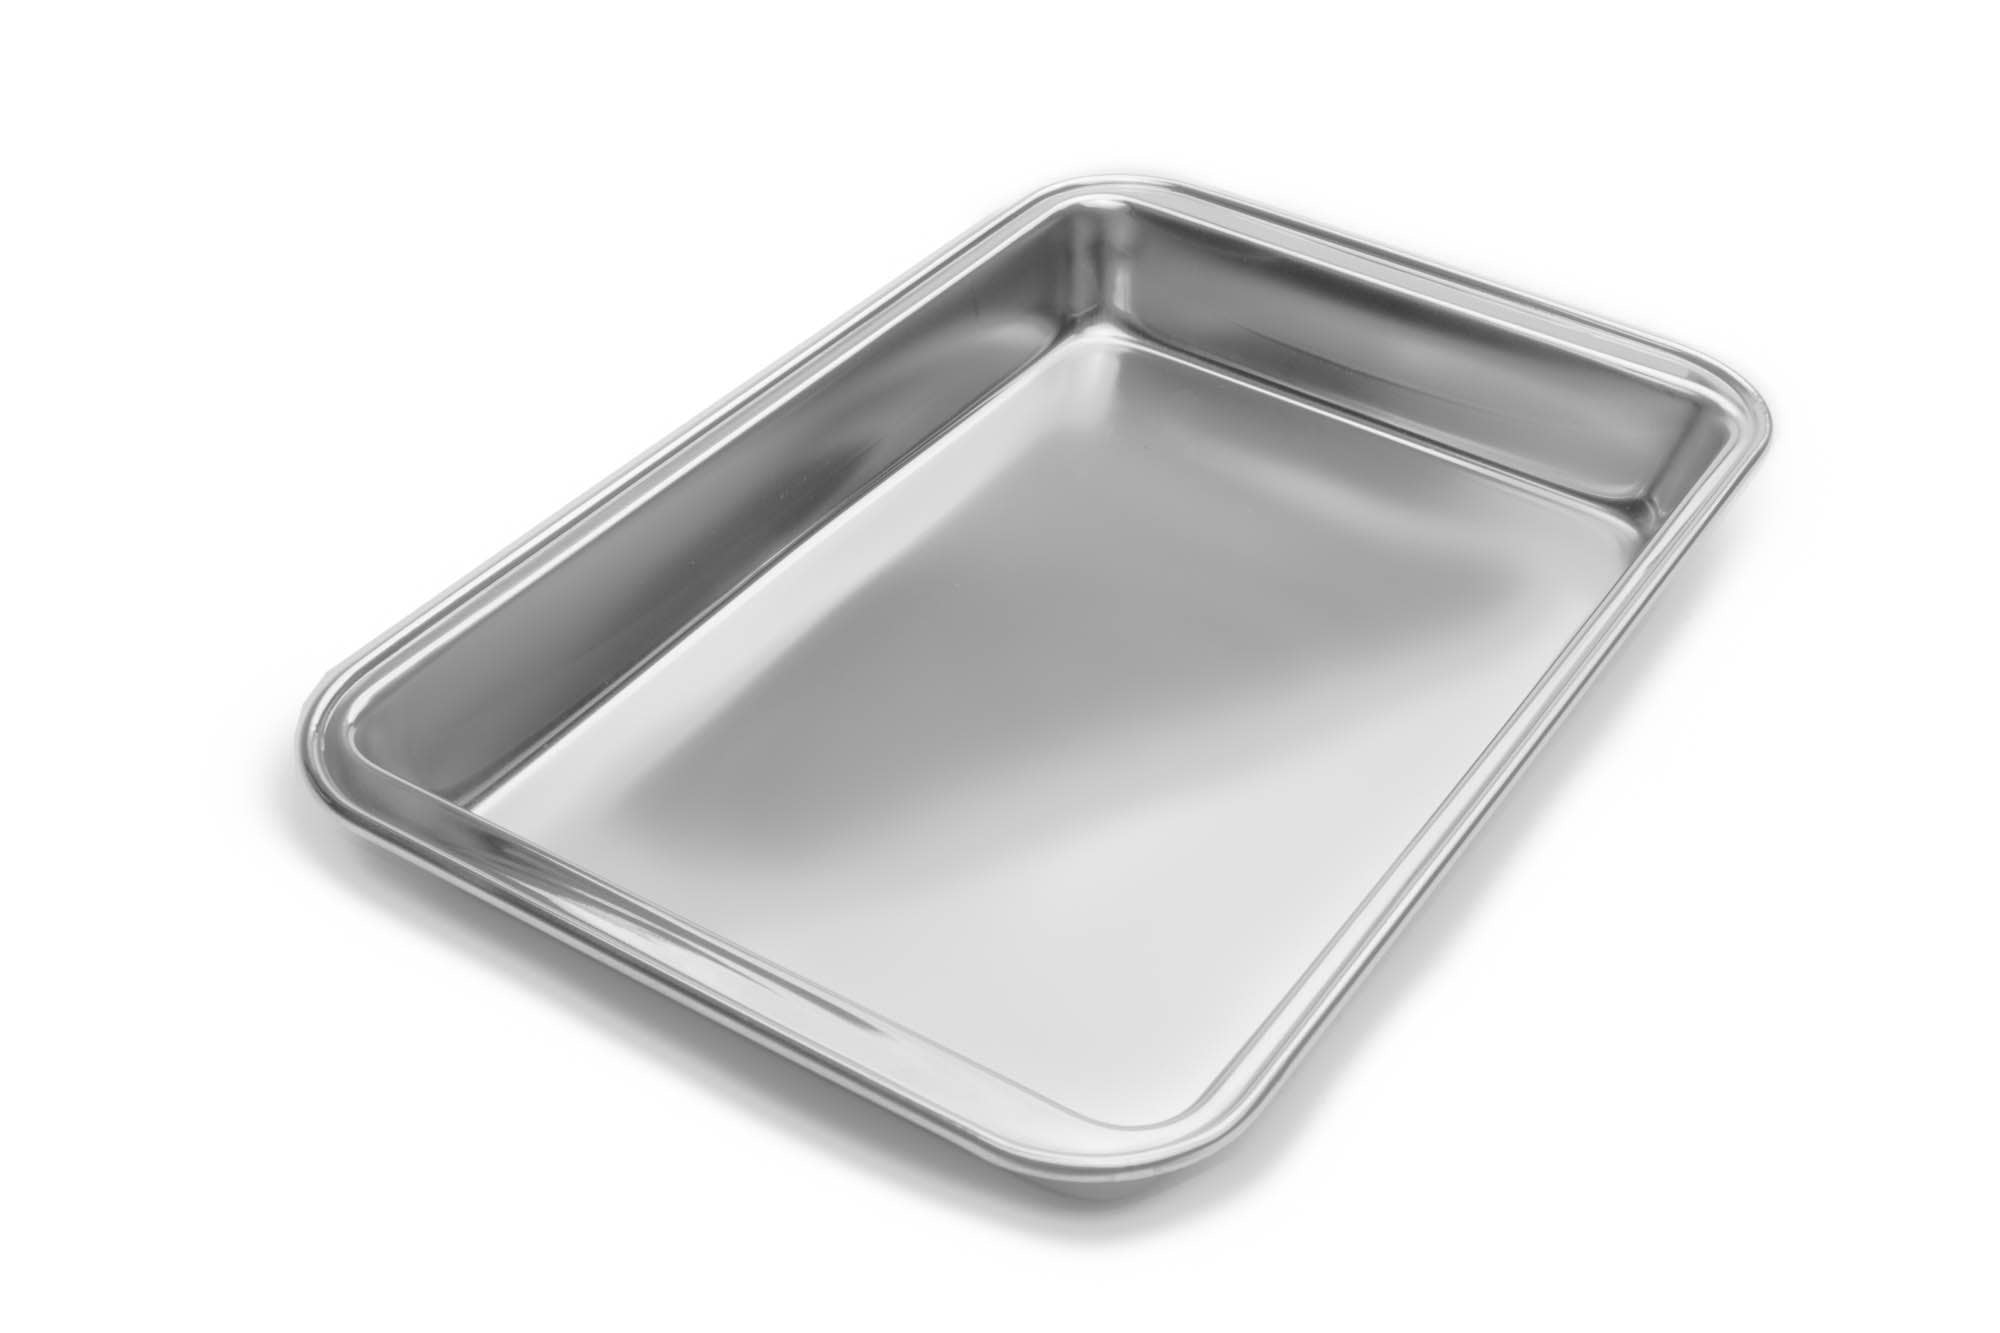 Stainless Steel Baking Tray , Oven Pan Rectangle Size 10 x 8 x 1 inch